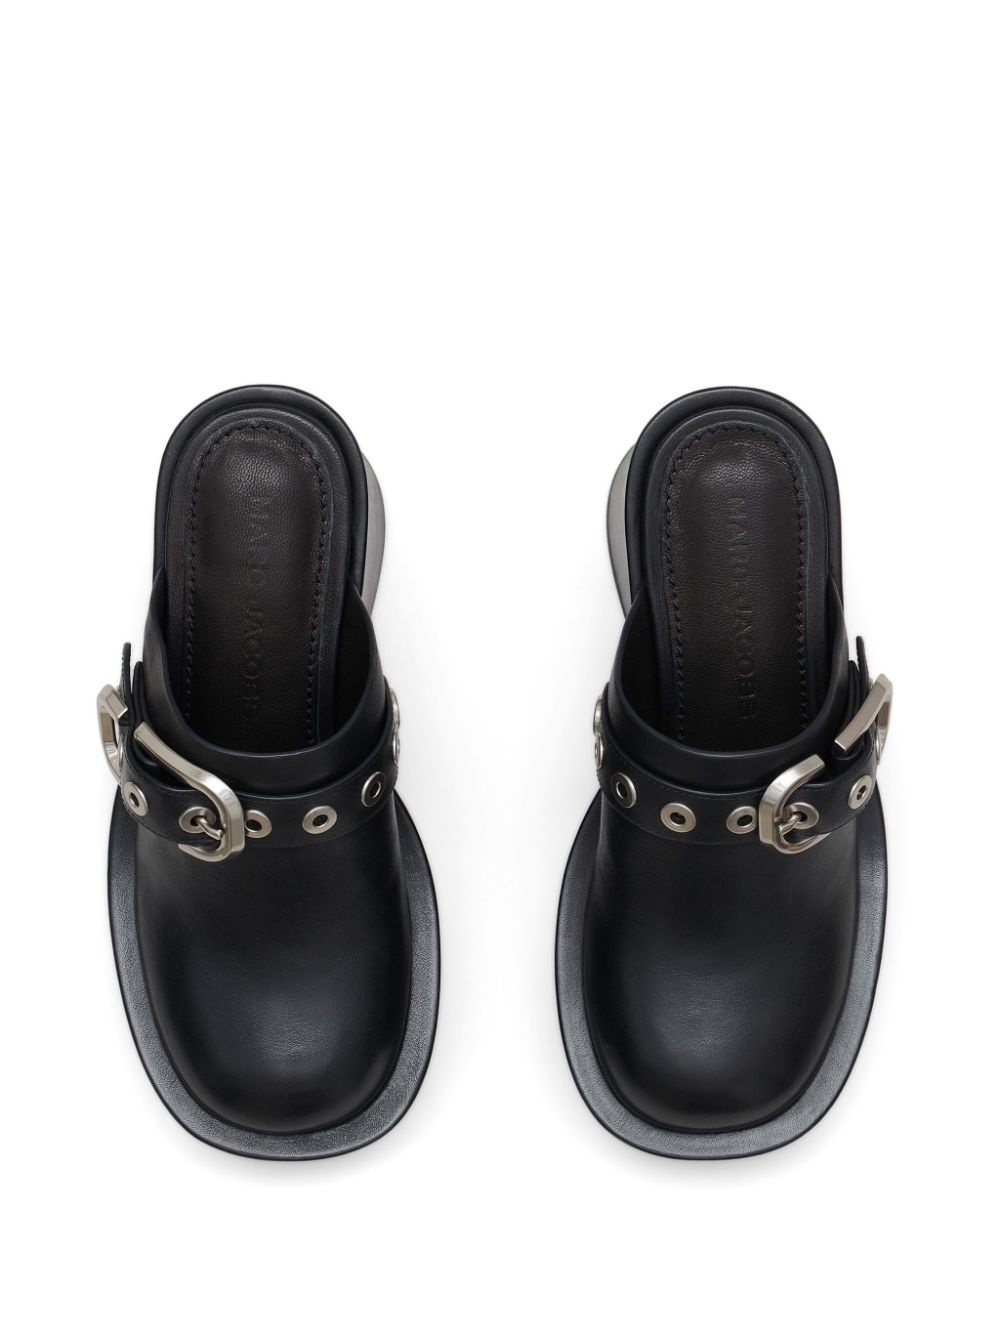 The J Marc leather clogs - 4